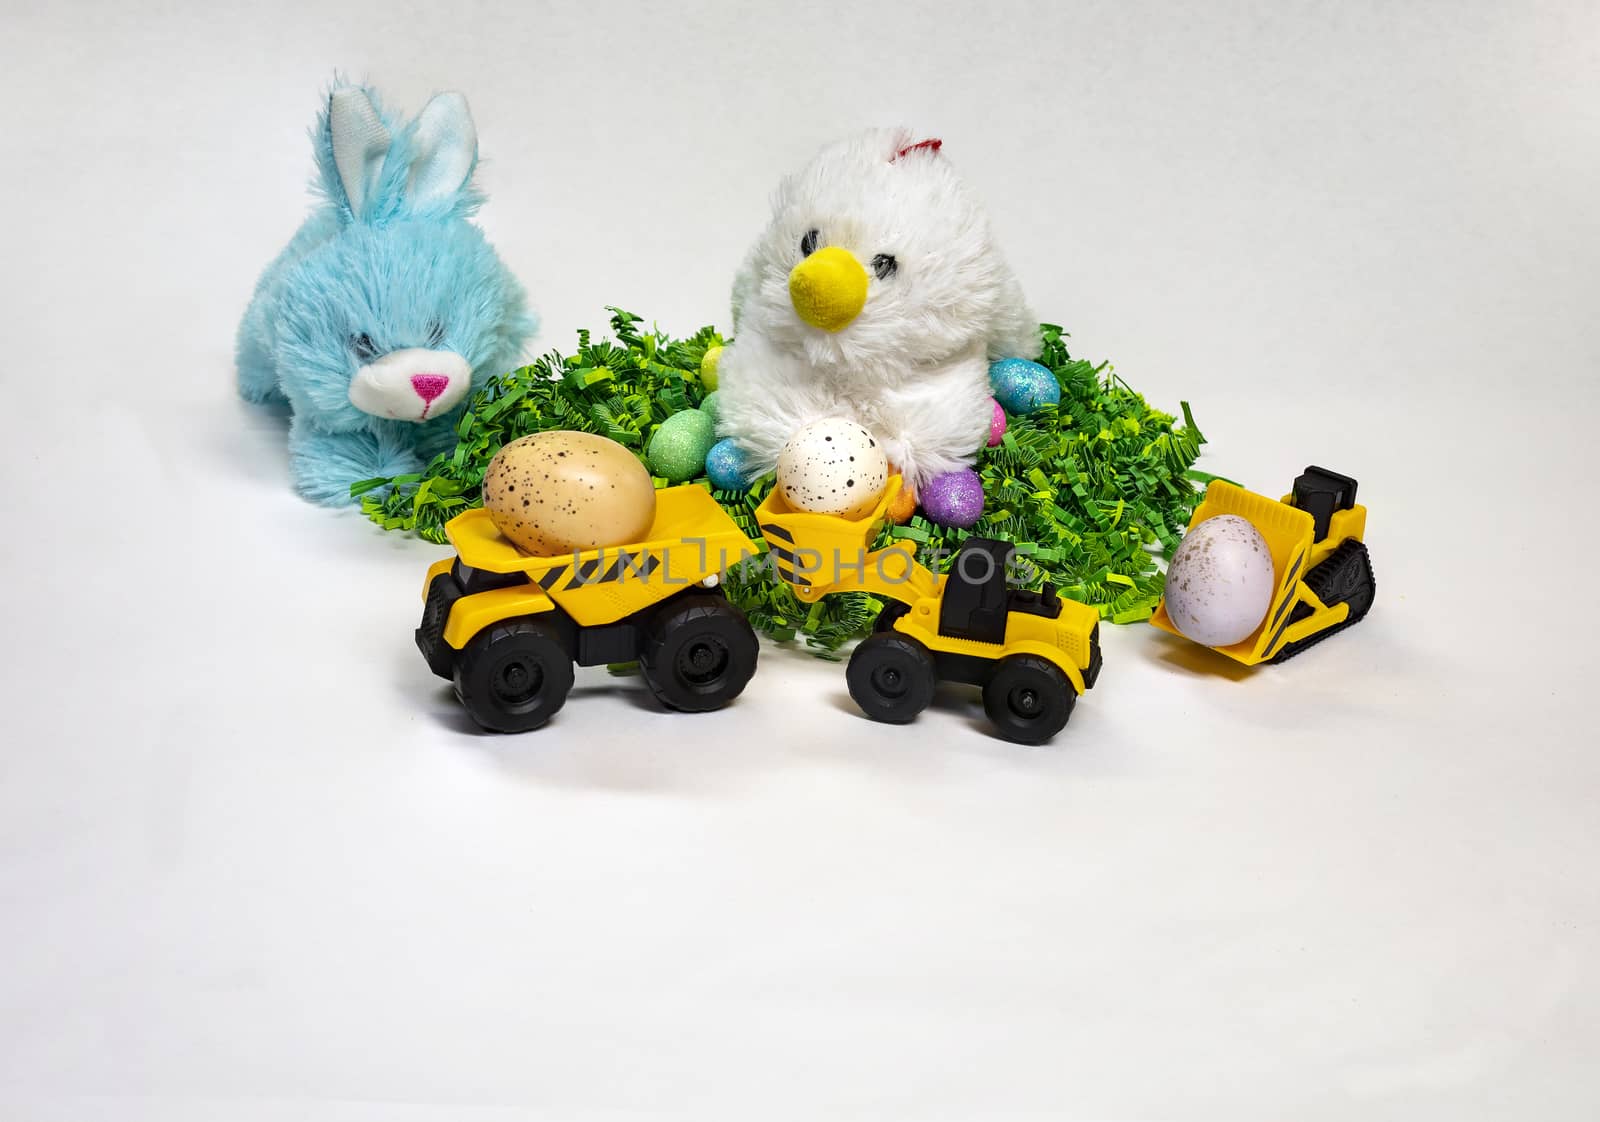 Easter themed photo of stufed bunny and hen with decorated Easter eggs and a child's toy construction vehicles.